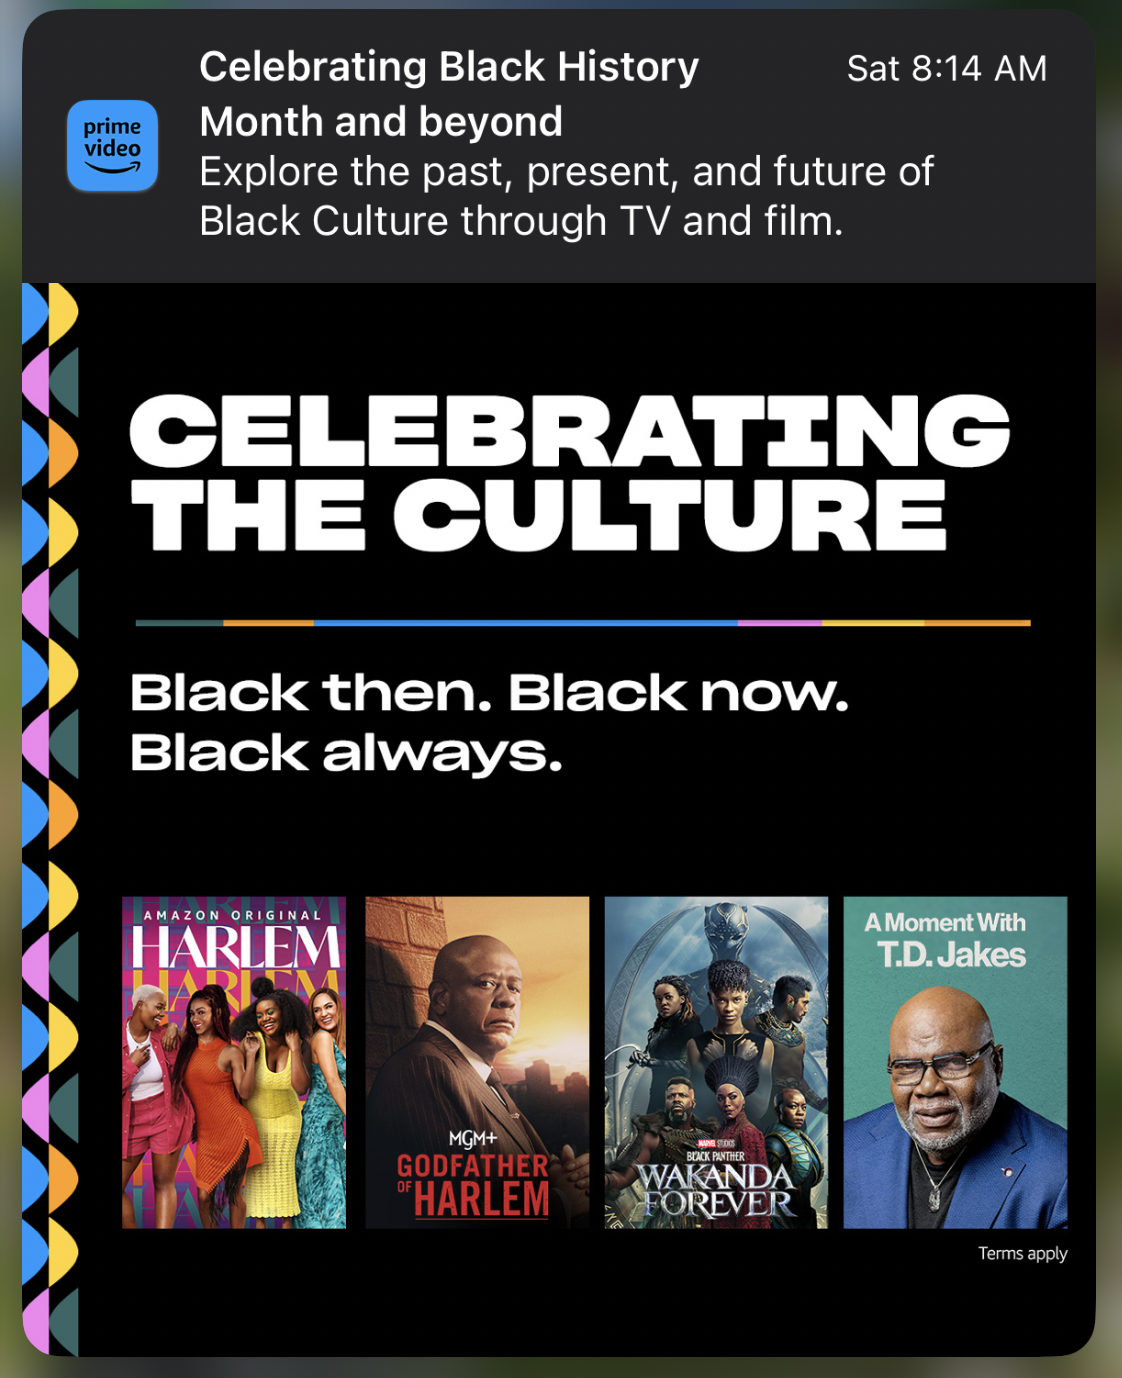 Amazon curated content for Black History Month